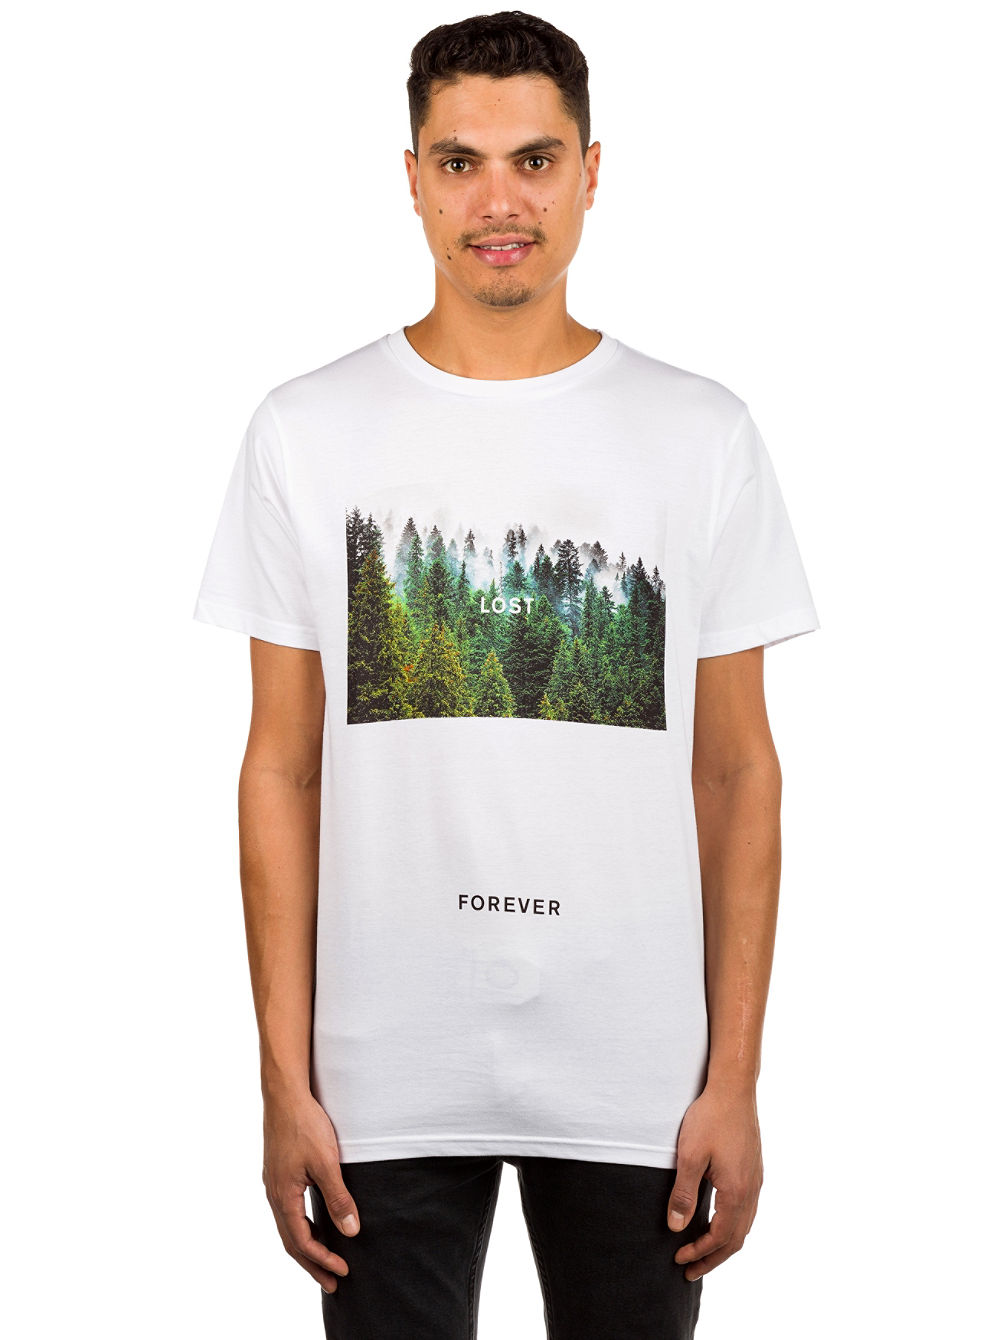 Lost Forever T-shirt